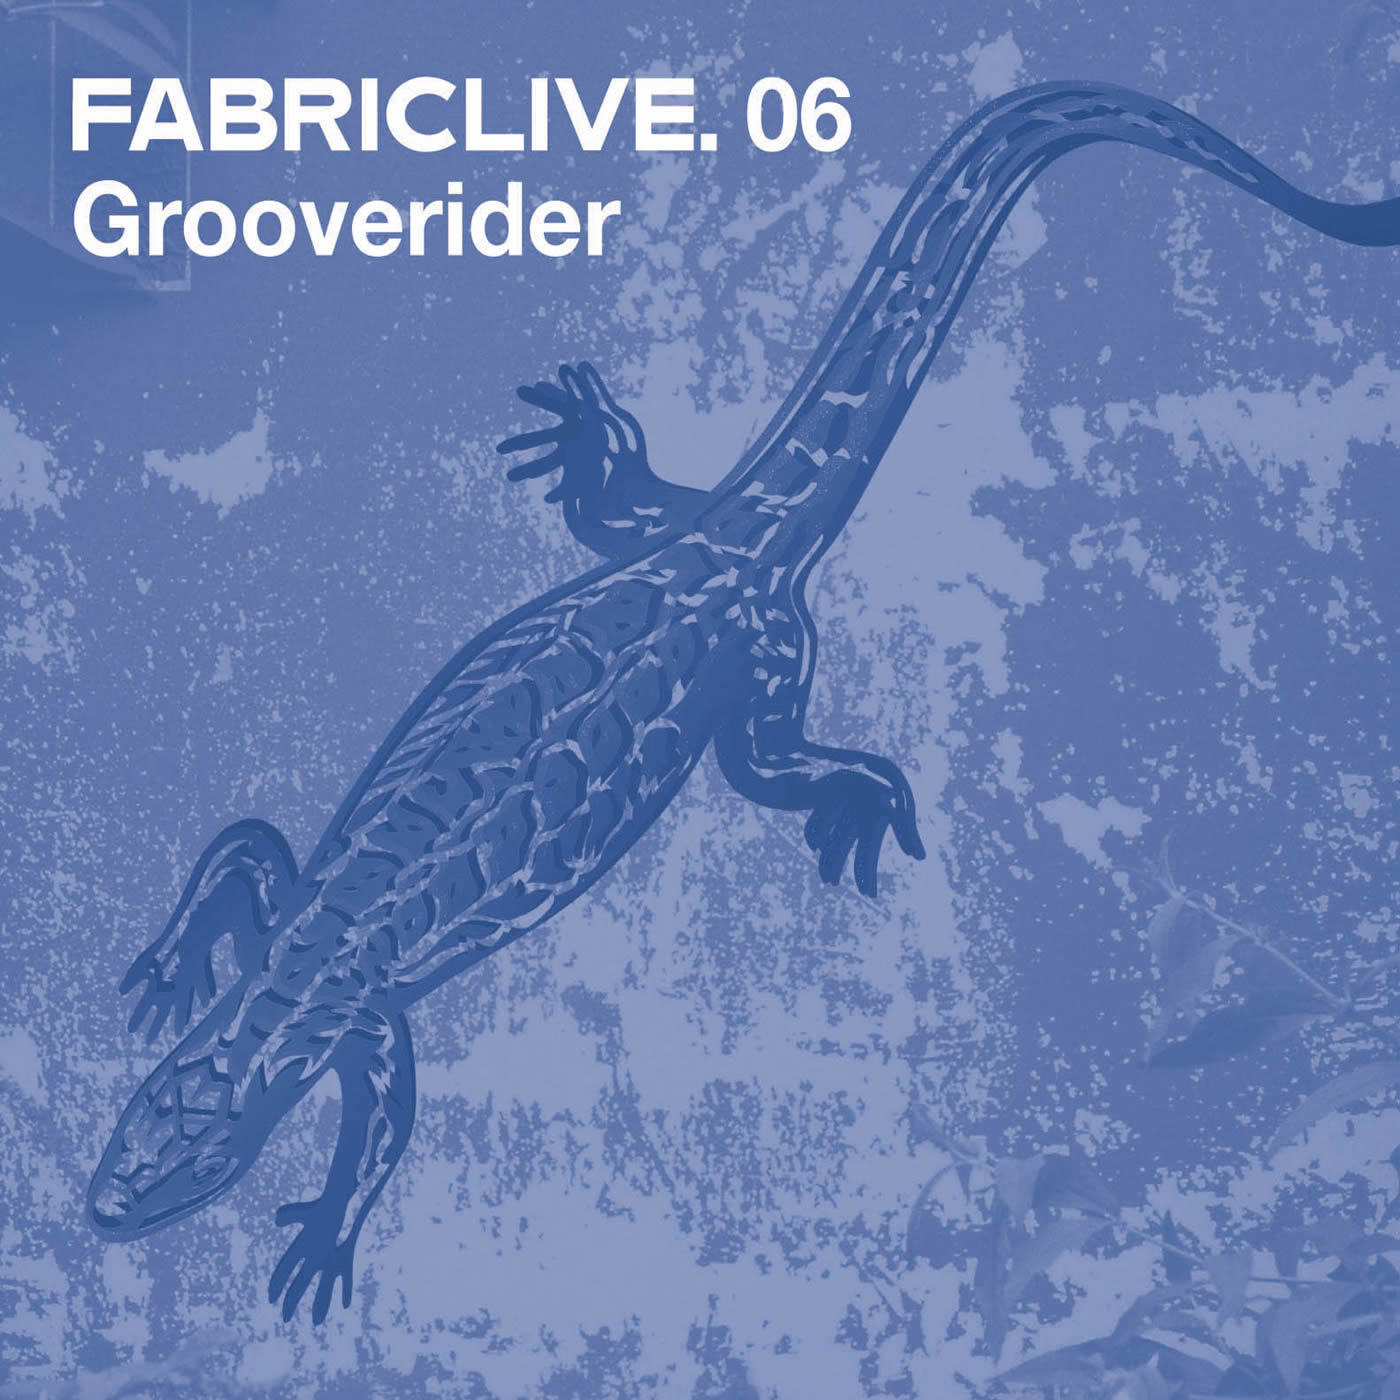 Grooverider - FABRICLIVE 06